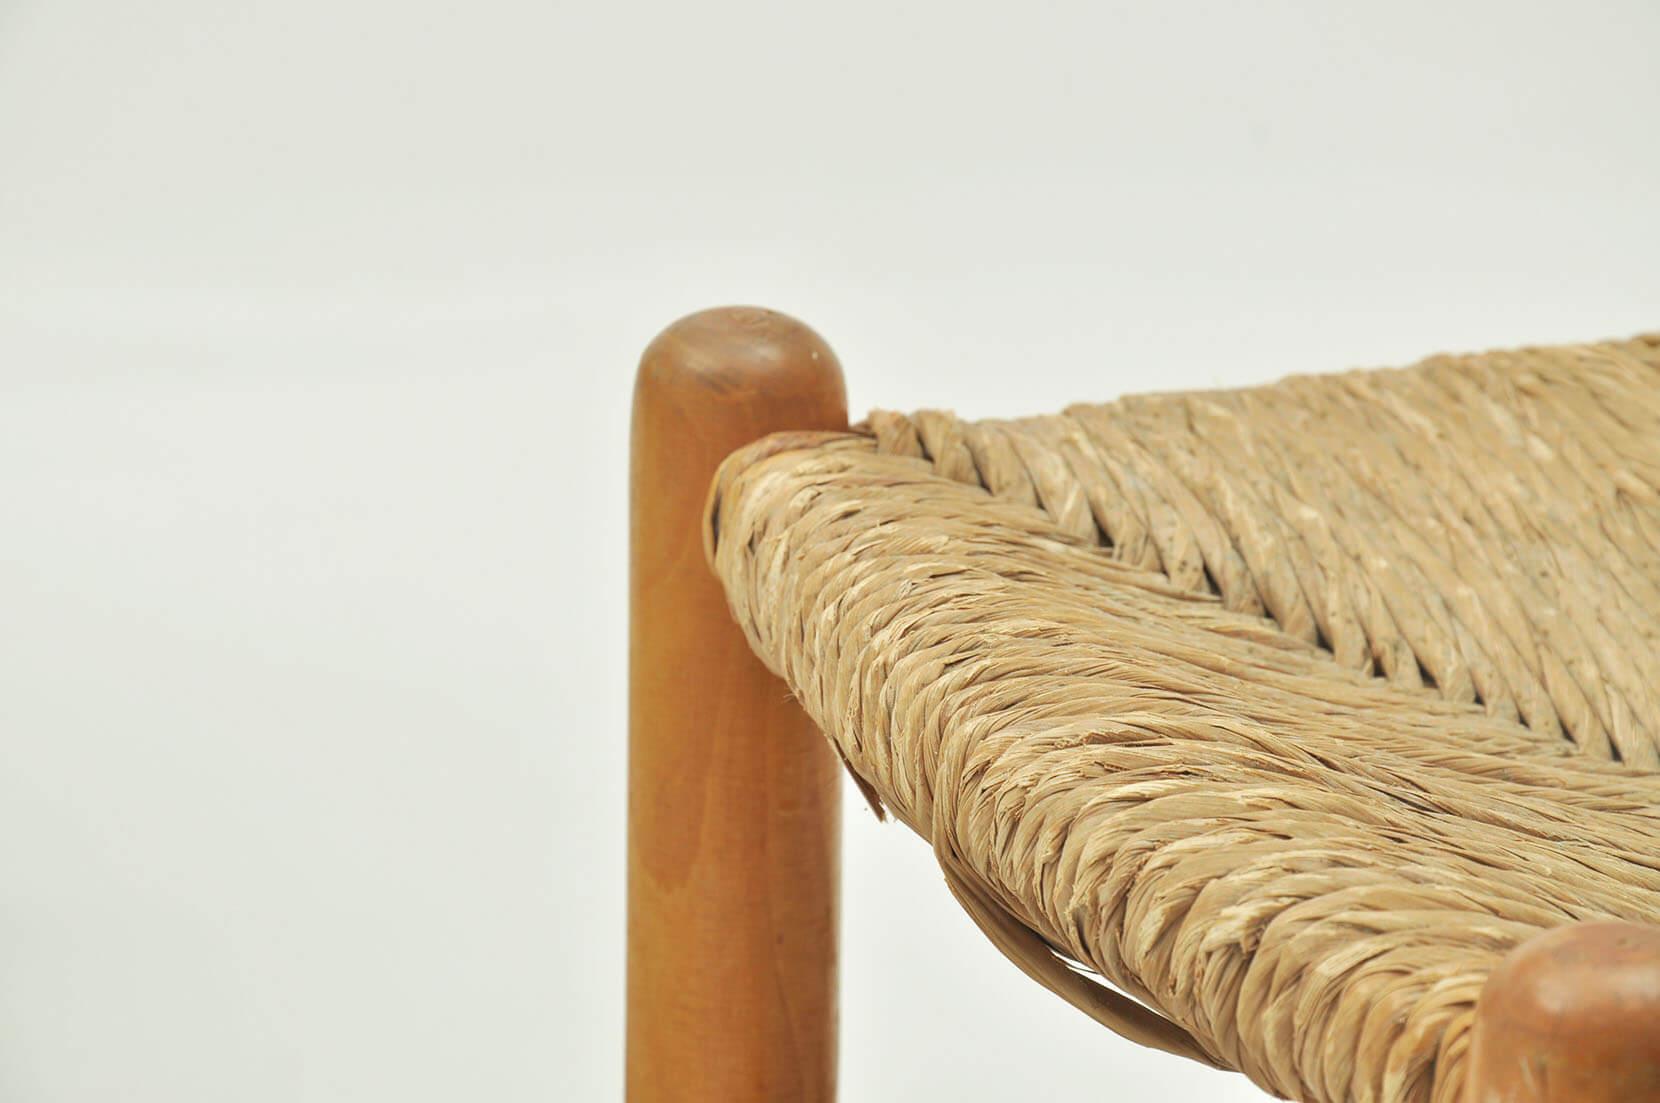 French Pair of Wood and Staw Stools by Charlotte Perriand for L'équipement de la Maison